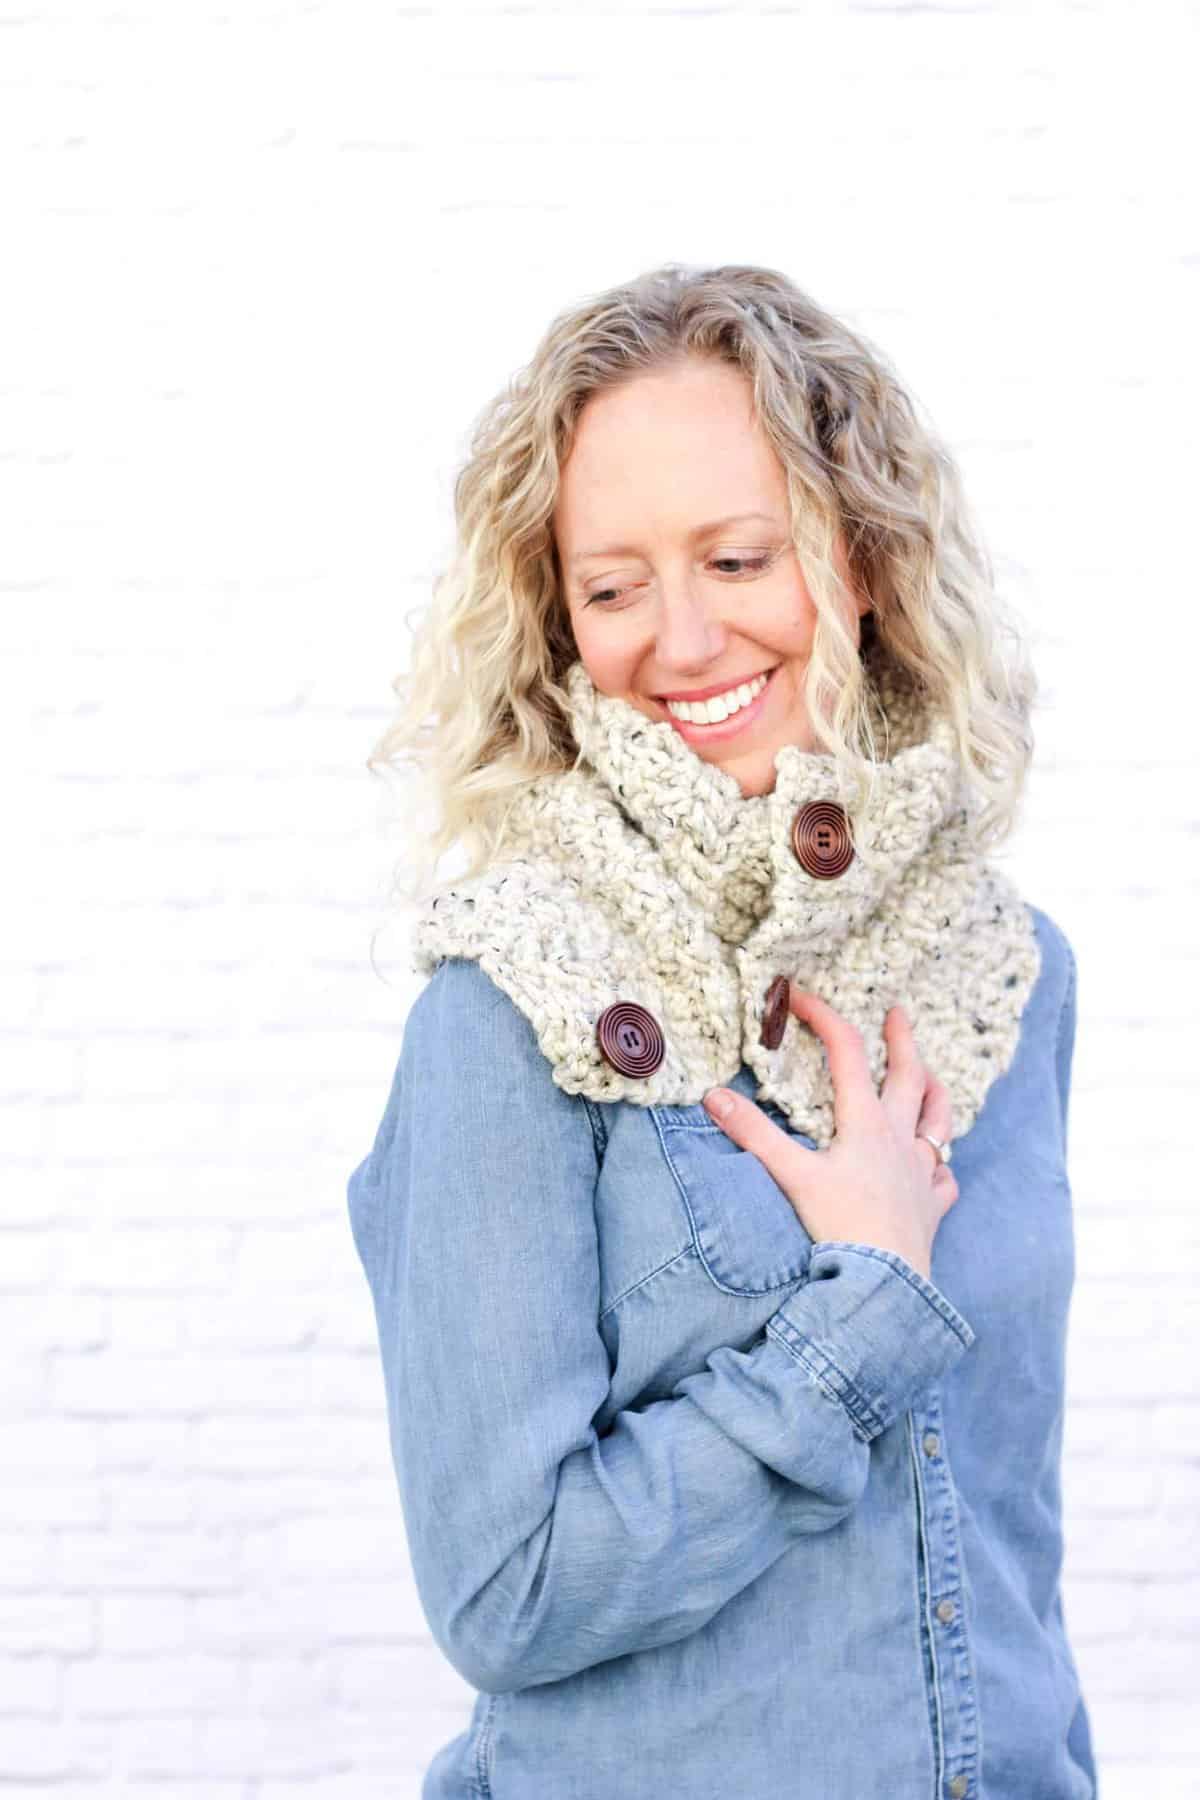 Modern, earthy crochet project for a young woman. Great DIY gift idea using inexpensive yarn. Free crochet cowl pattern!